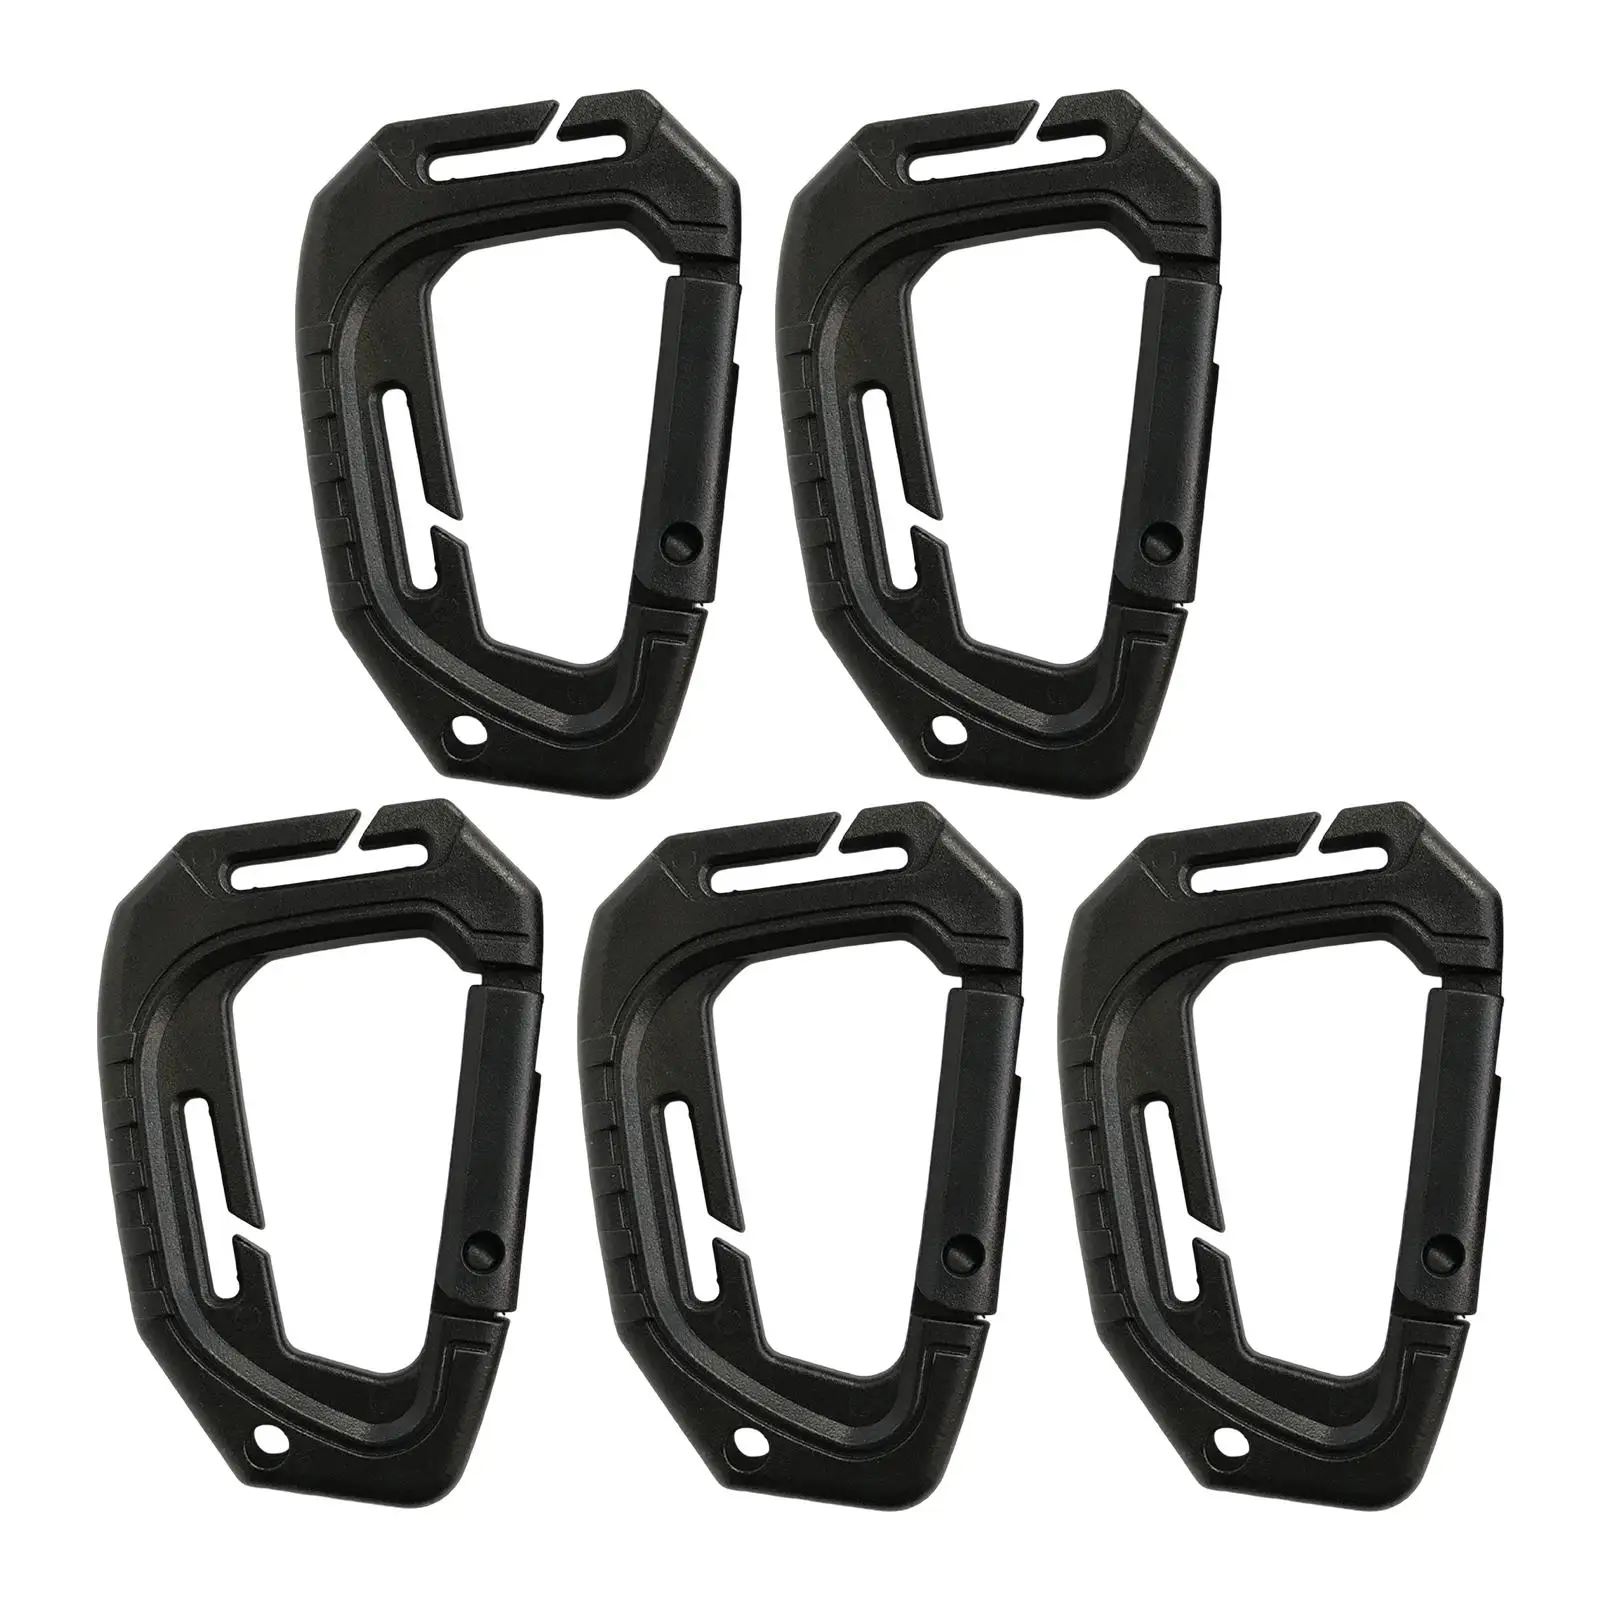 5Pcs D Shaped Carabiner Attachment Webbing Release Hook Keychain Carabiners for Backpack Keys Water Bottle Camping Outdoor